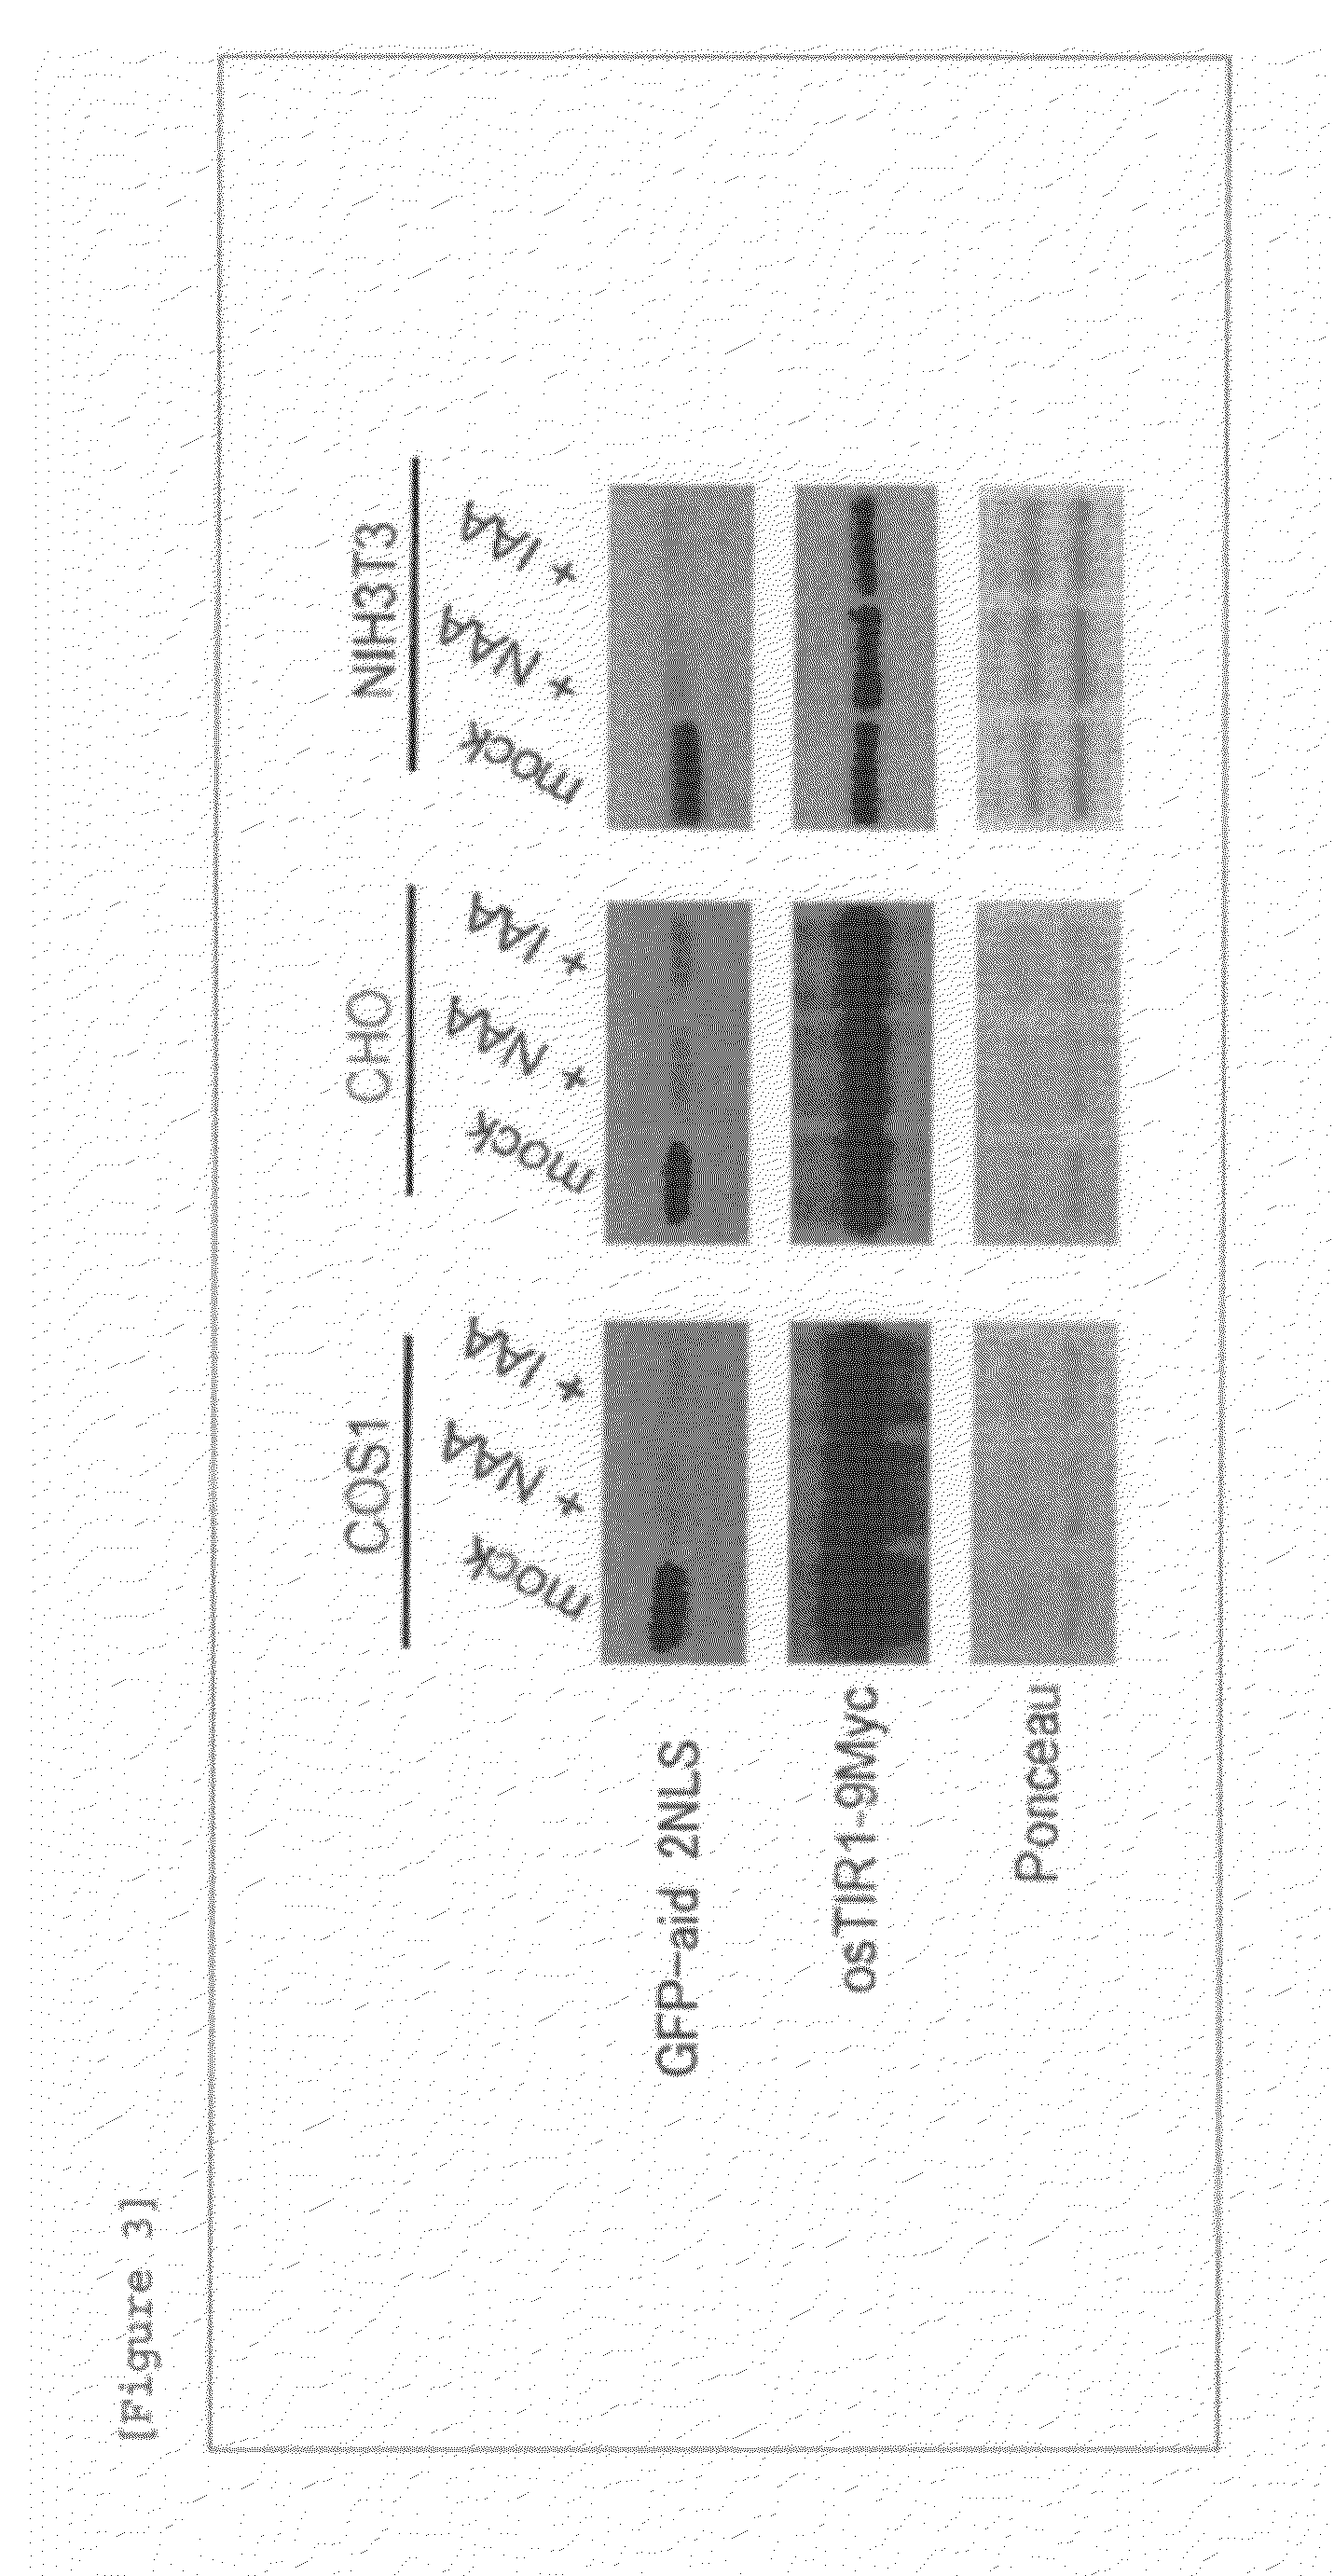 Method for inducing degradation of protein in mammalian cell